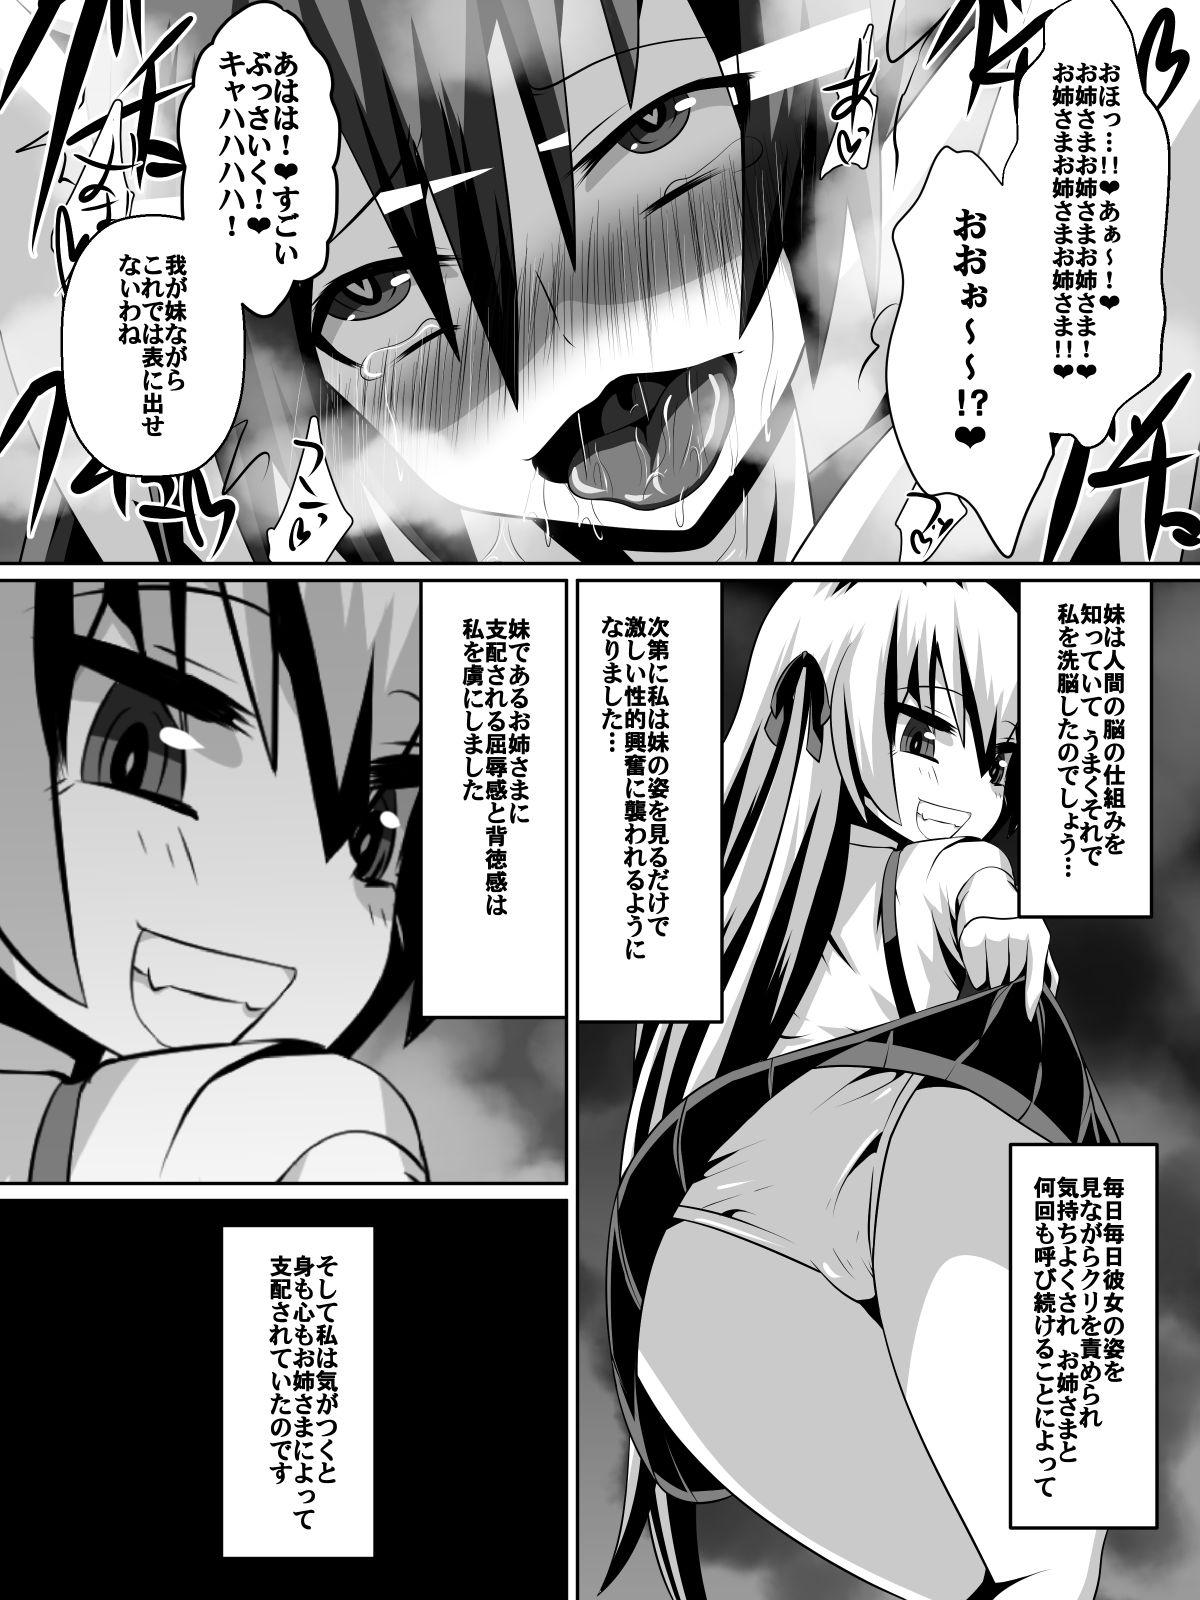 Submission Azuha to Rin Tease - Page 10